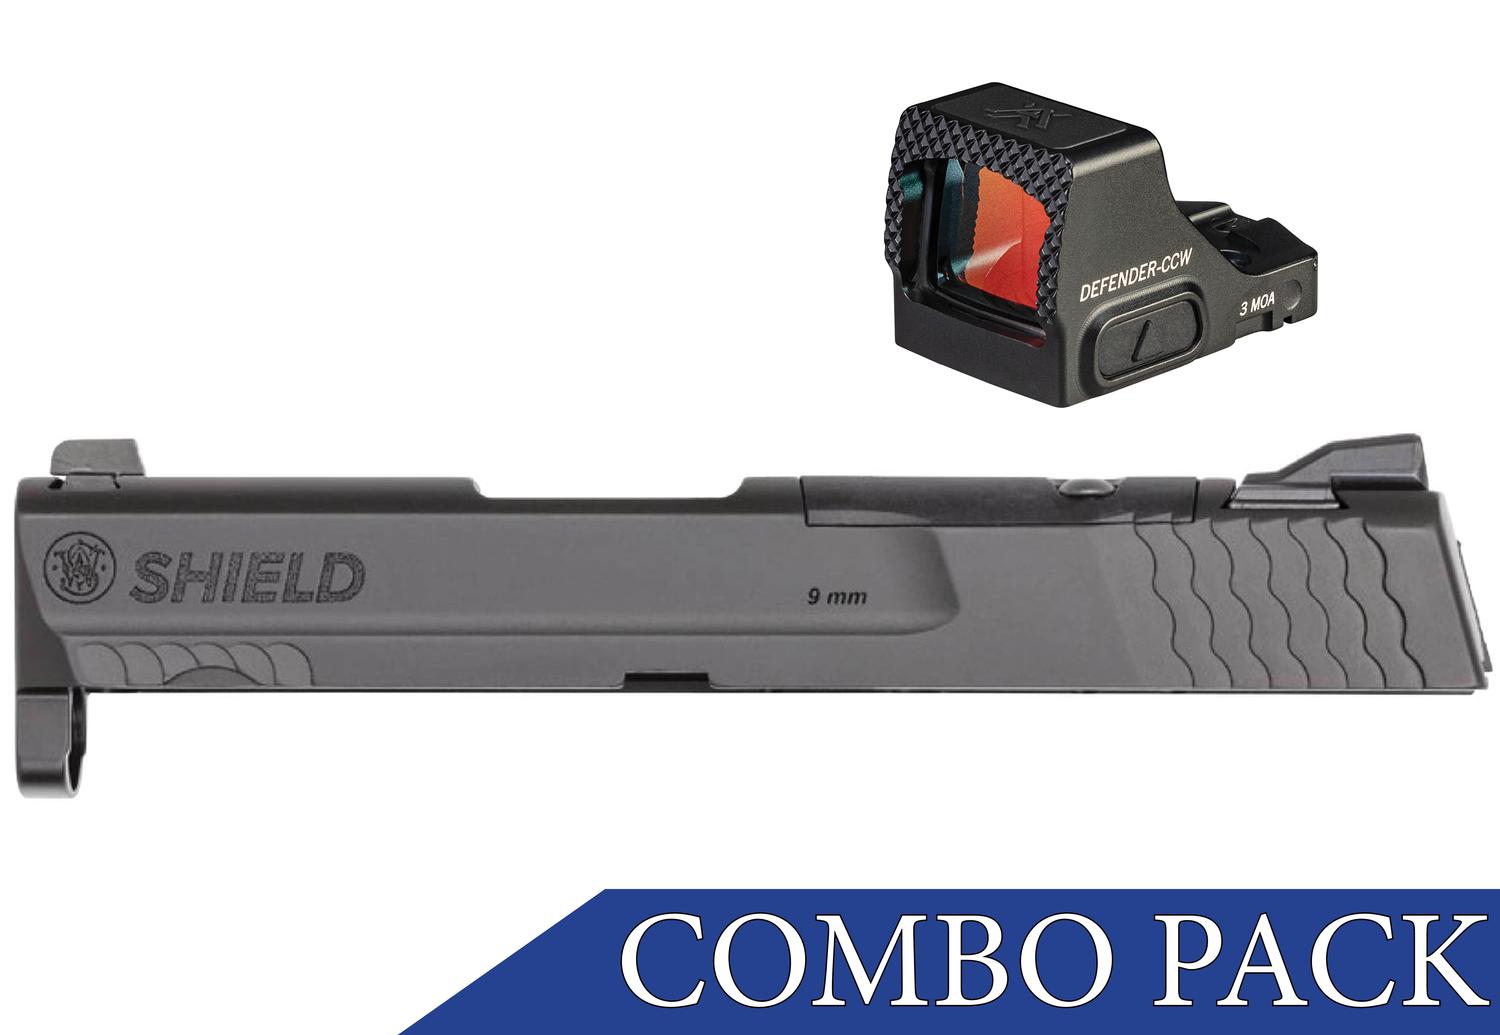  M & P9 Shield Slide Assembly & Vortex Defender- Ccw 3 Moa Micro Red Dot Sight